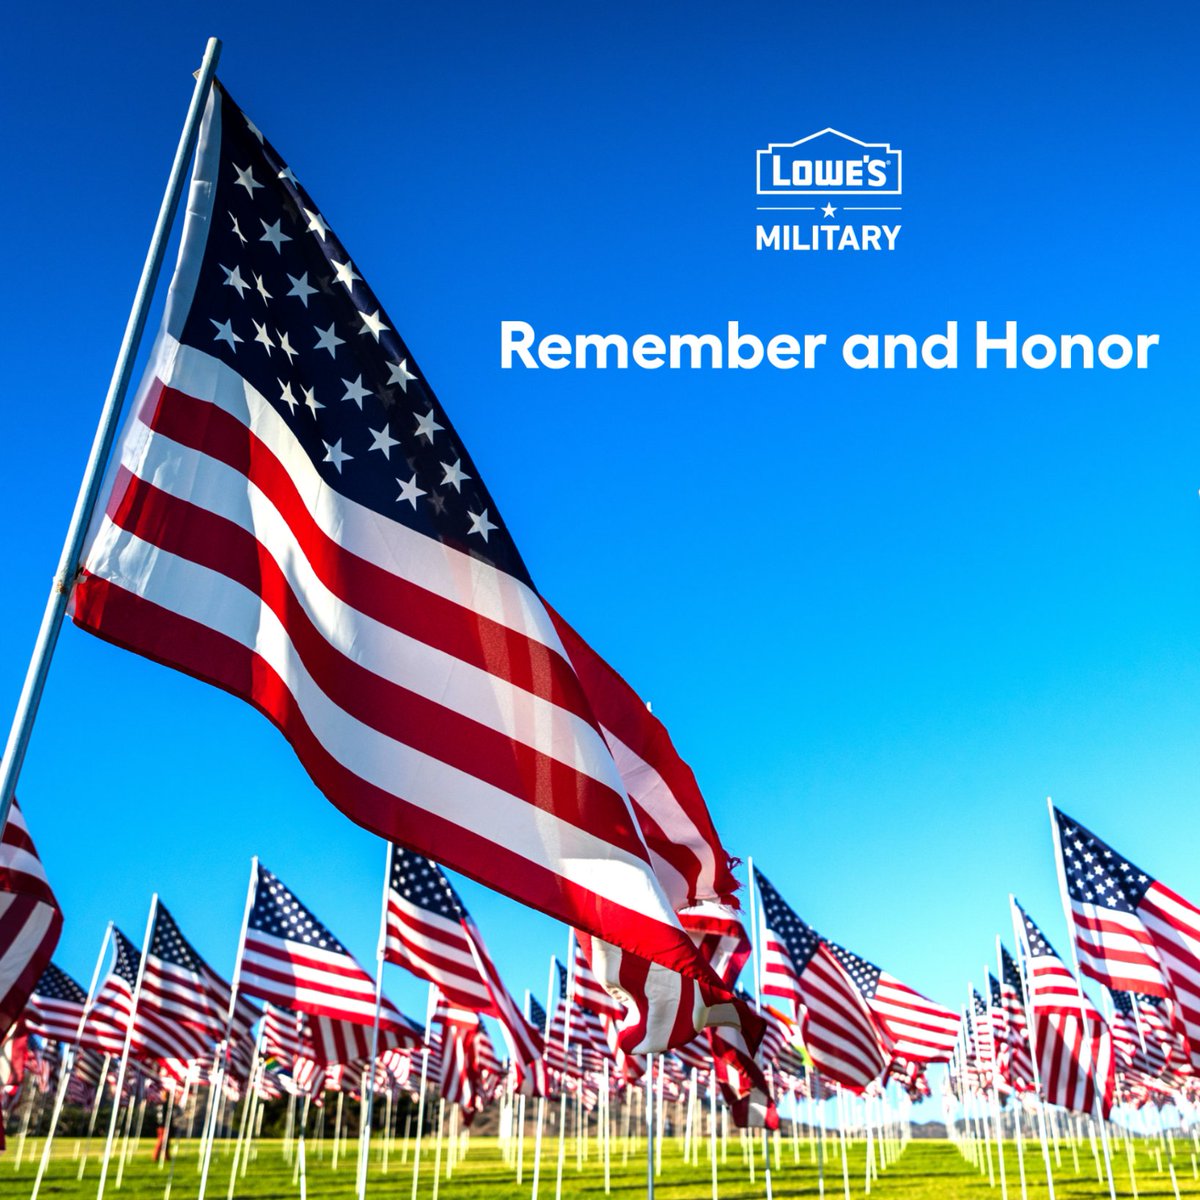 On this #MemorialDay, we pay tribute to the heroes who gave their lives for our country and the values we hold dear. Today and every day, we honor them.